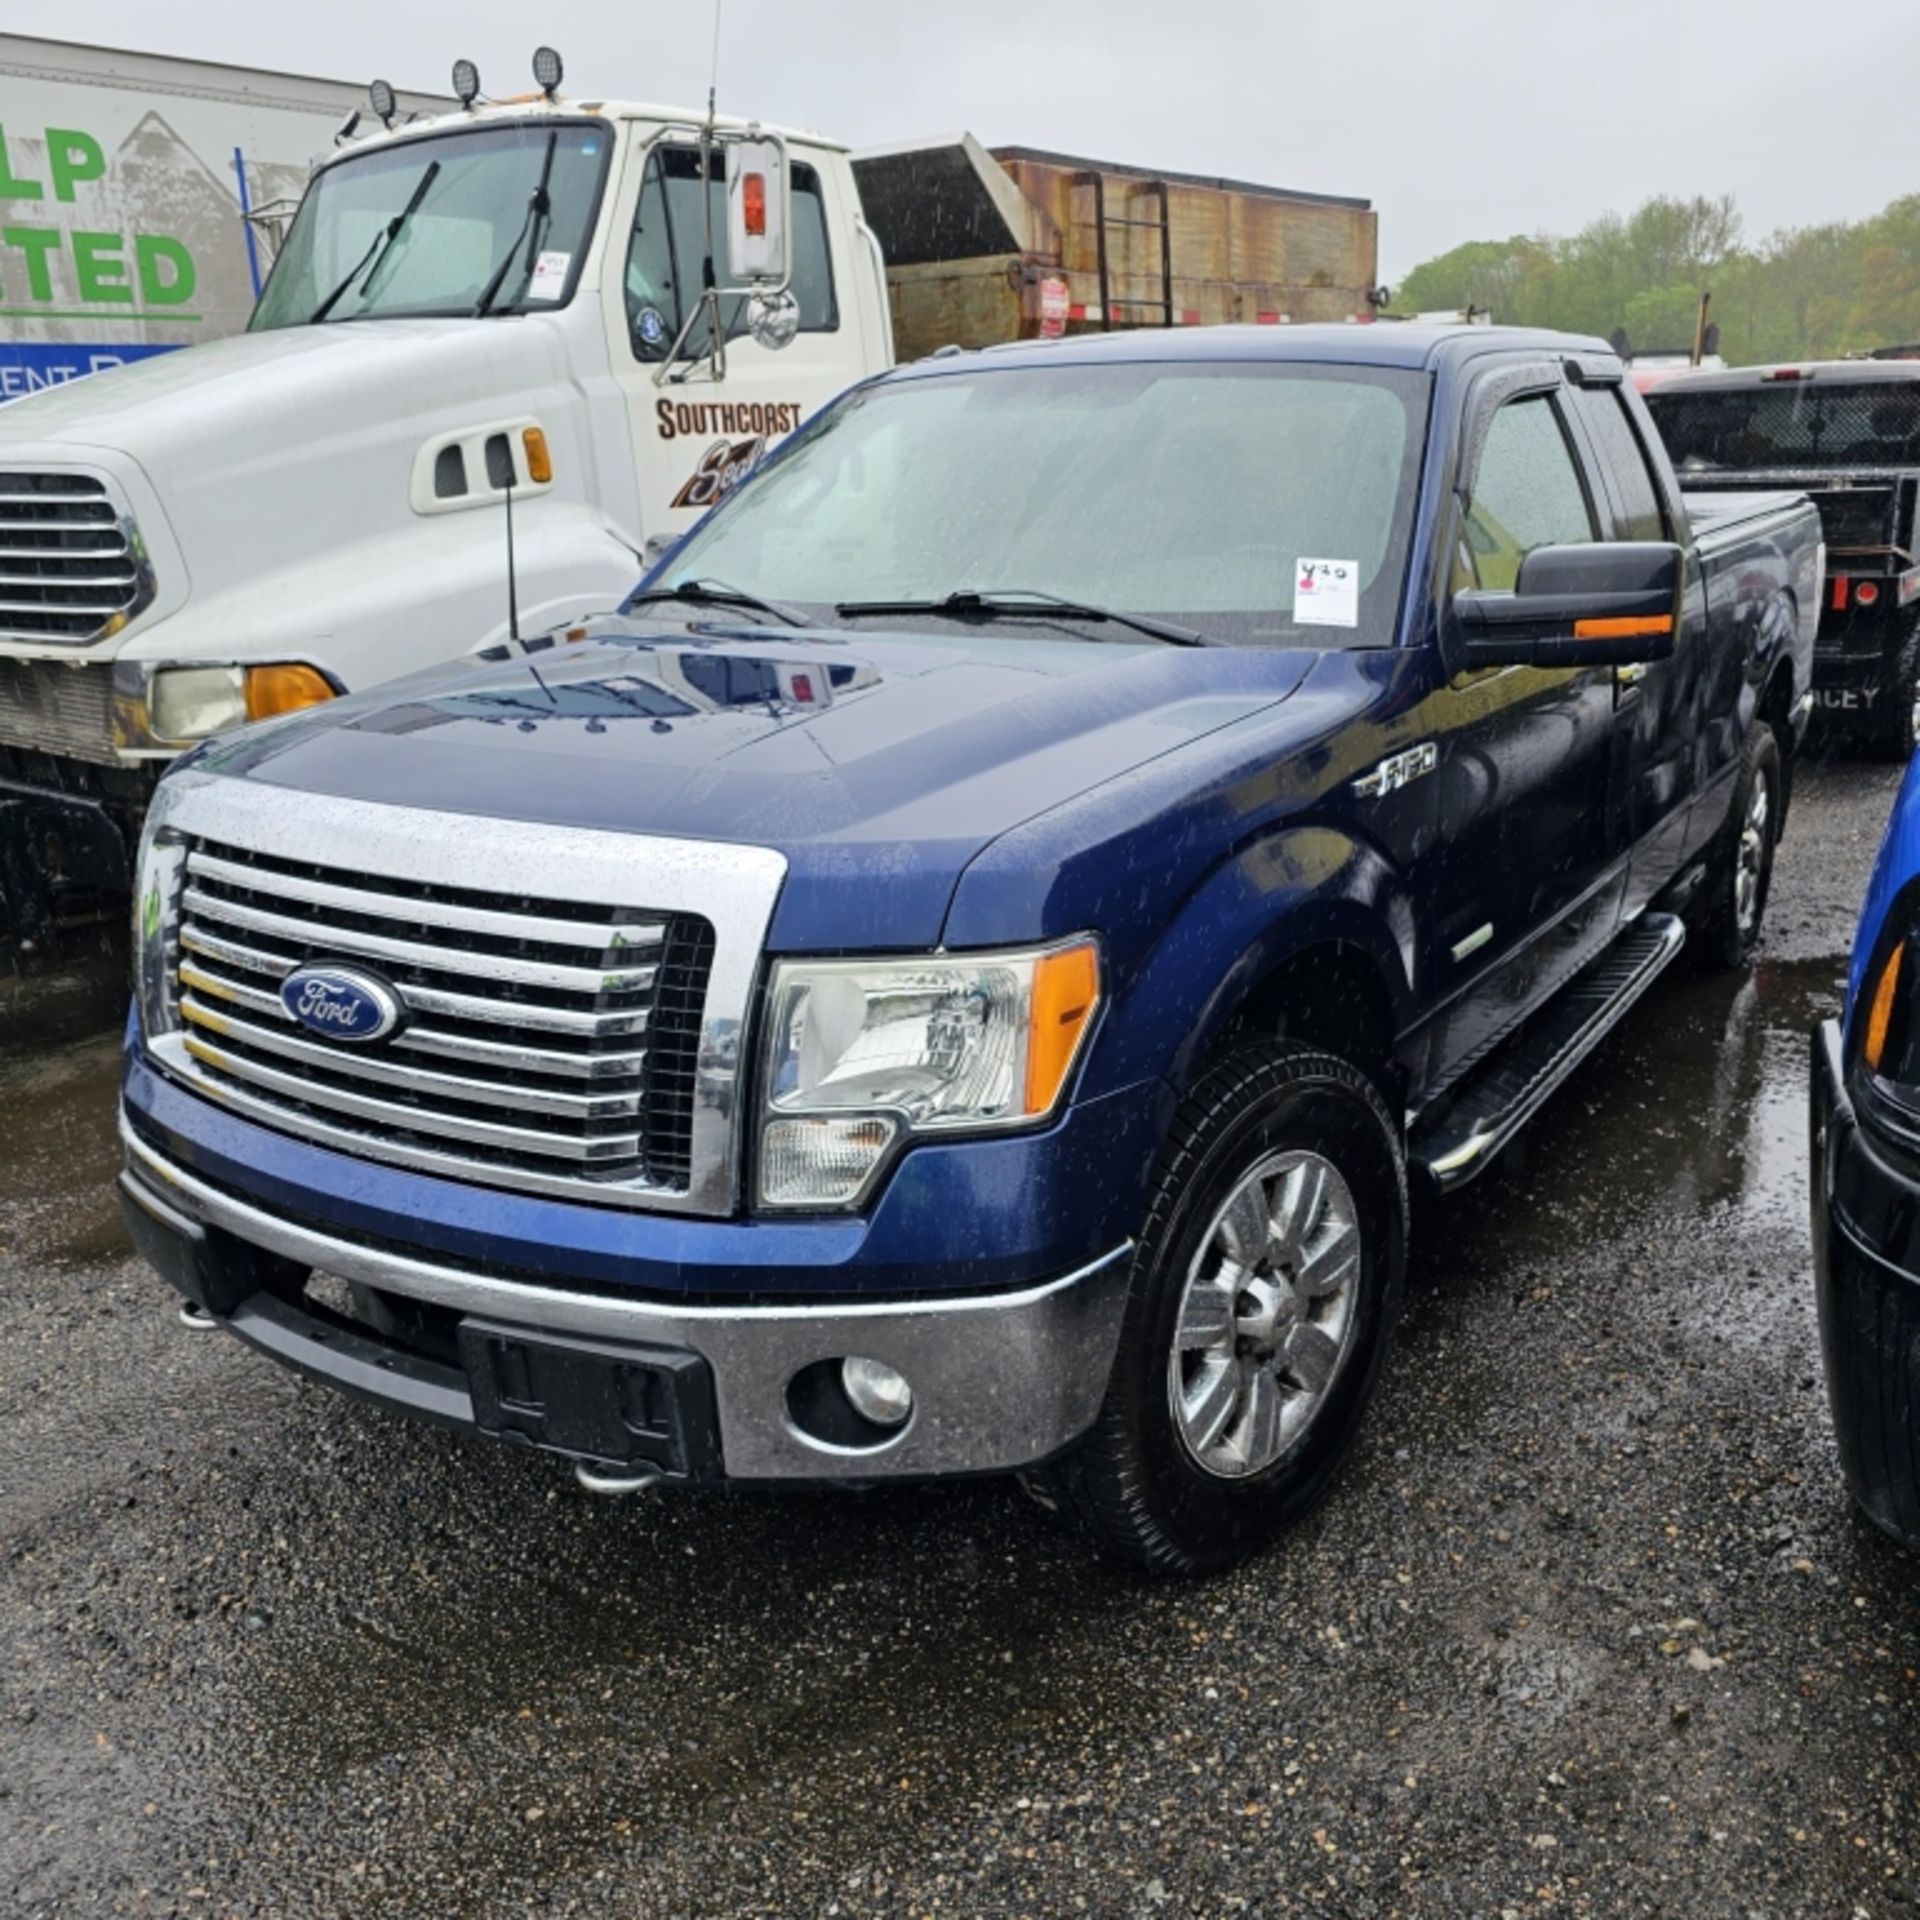 2011 Ford F150 - Image 2 of 8